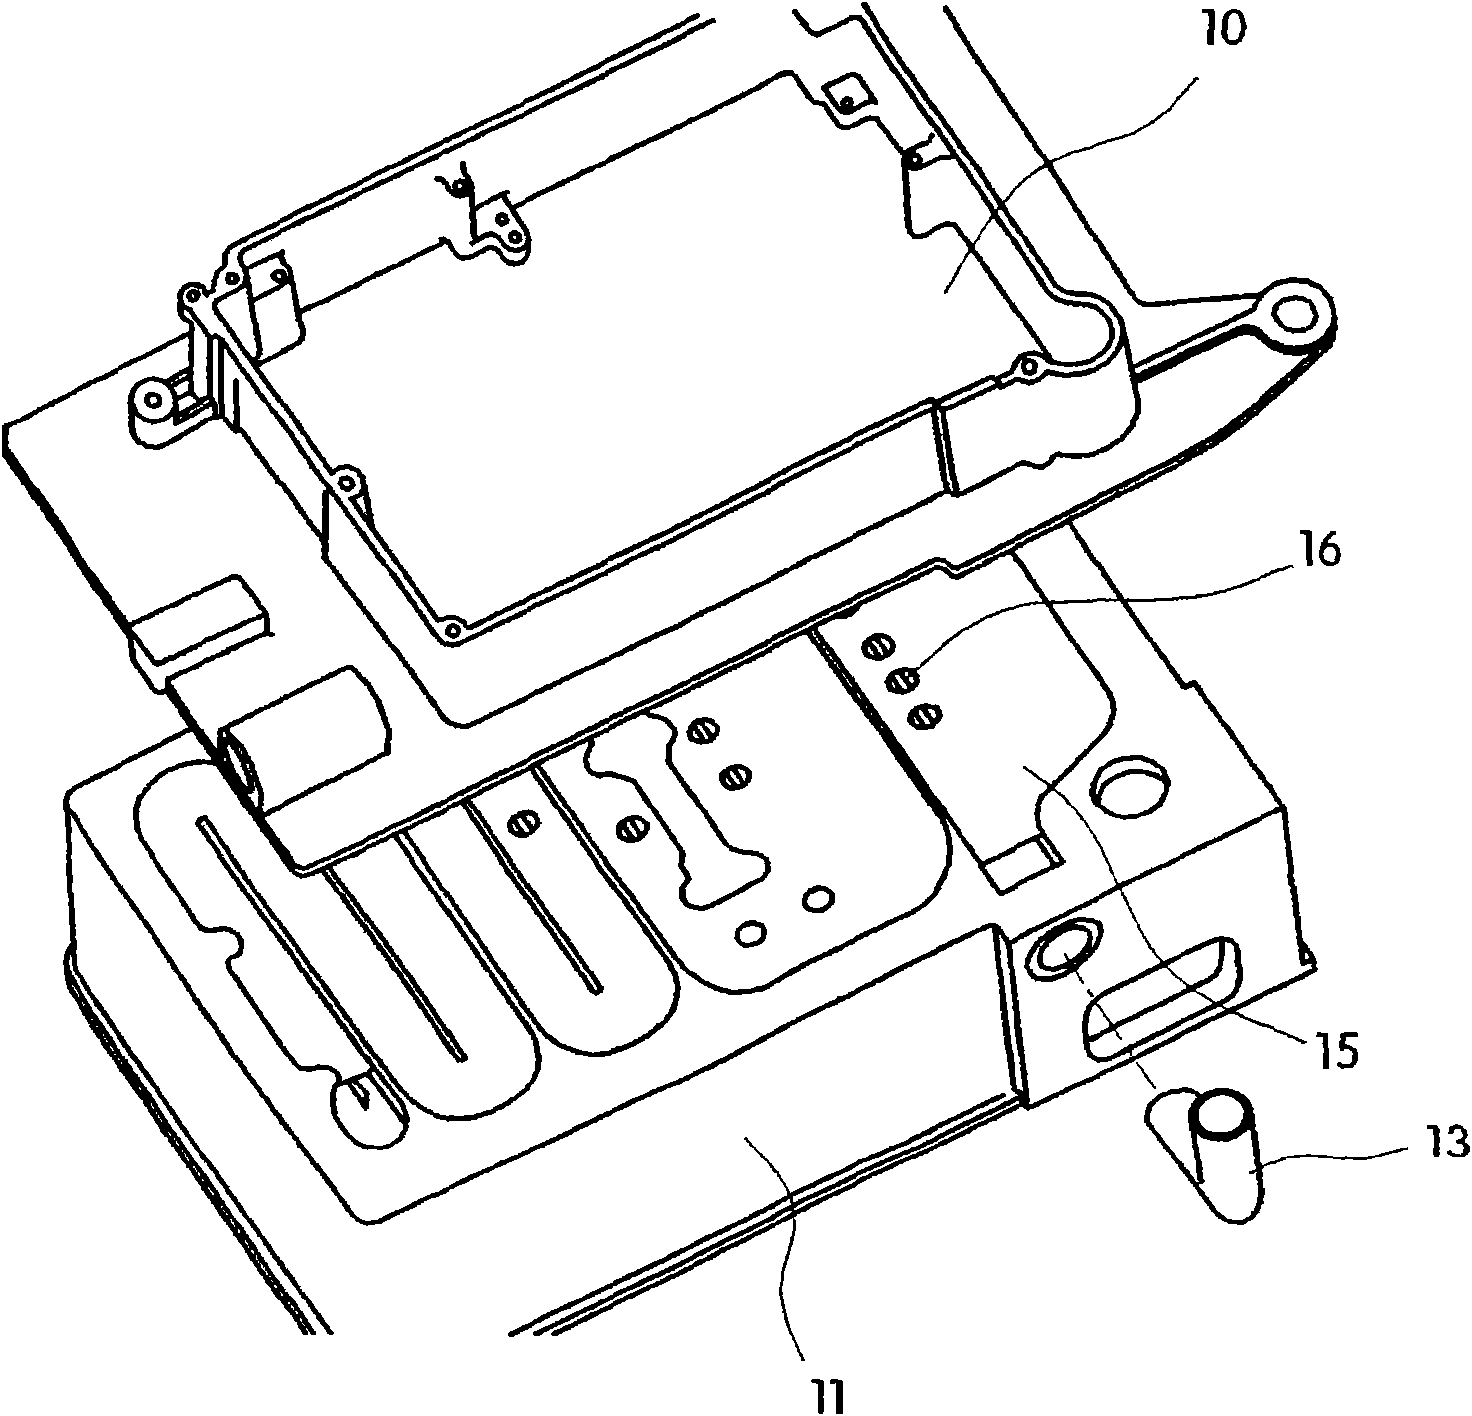 Cooling apparatus for electric modules of hybrid electric vehicle or electric vehicle